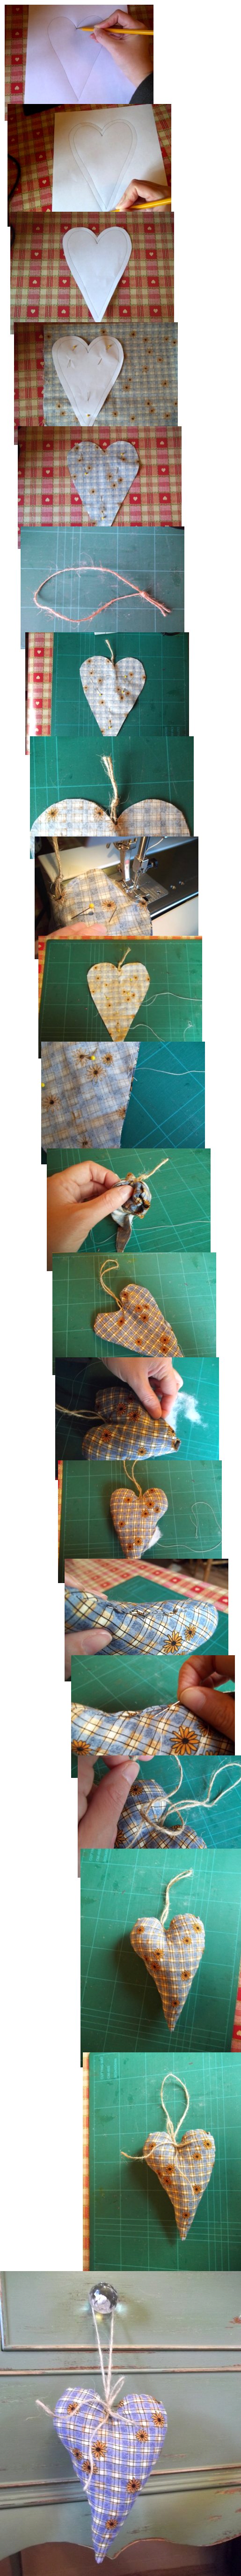 Things to make and do - sew a hanging heart decoration